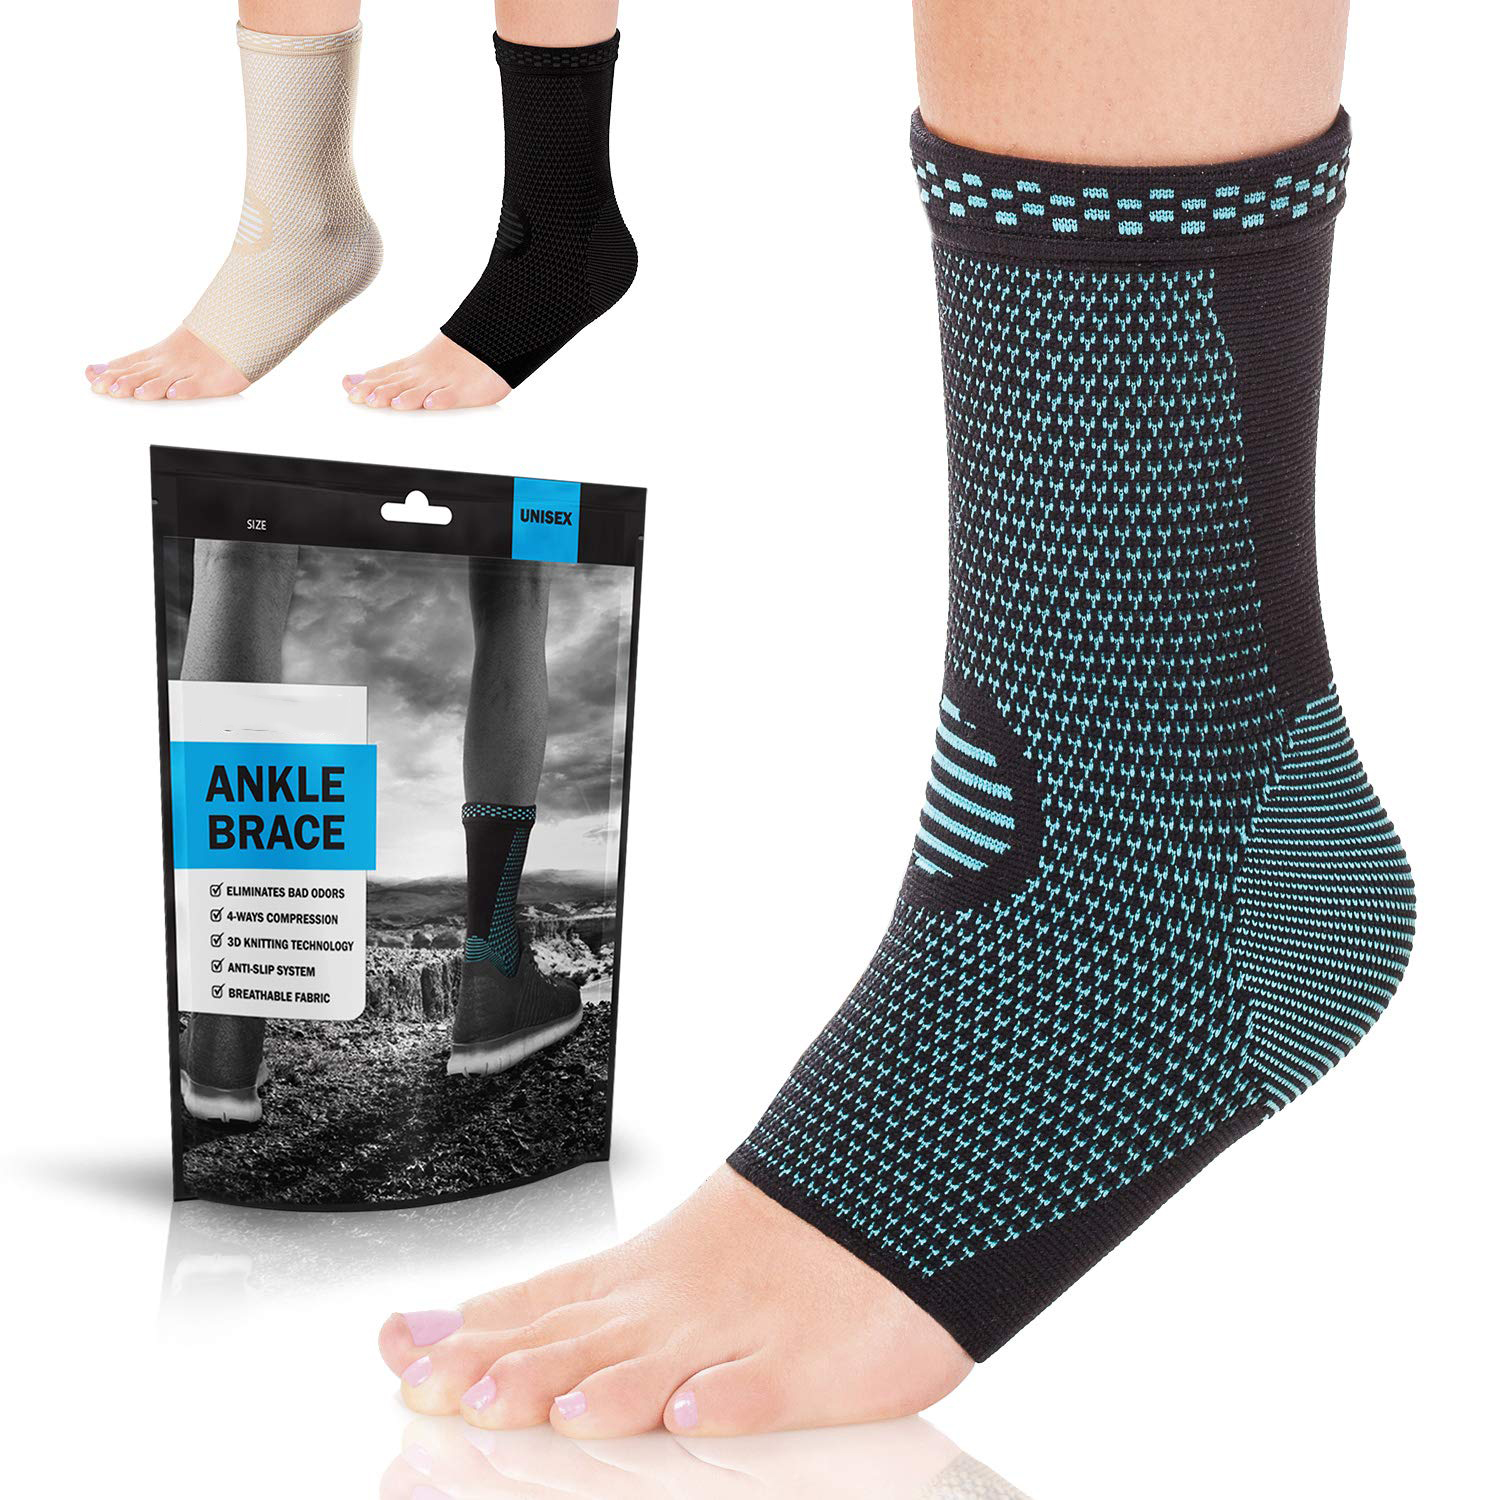 Best quality Athletic Sport Tapes - Ankle Brace Compression Support Sleeve (Pair) for Injury Recovery, Joint Pain and More. Achilles Tendon Support, Plantar Fasciitis Foot Socks with Arch Support,...